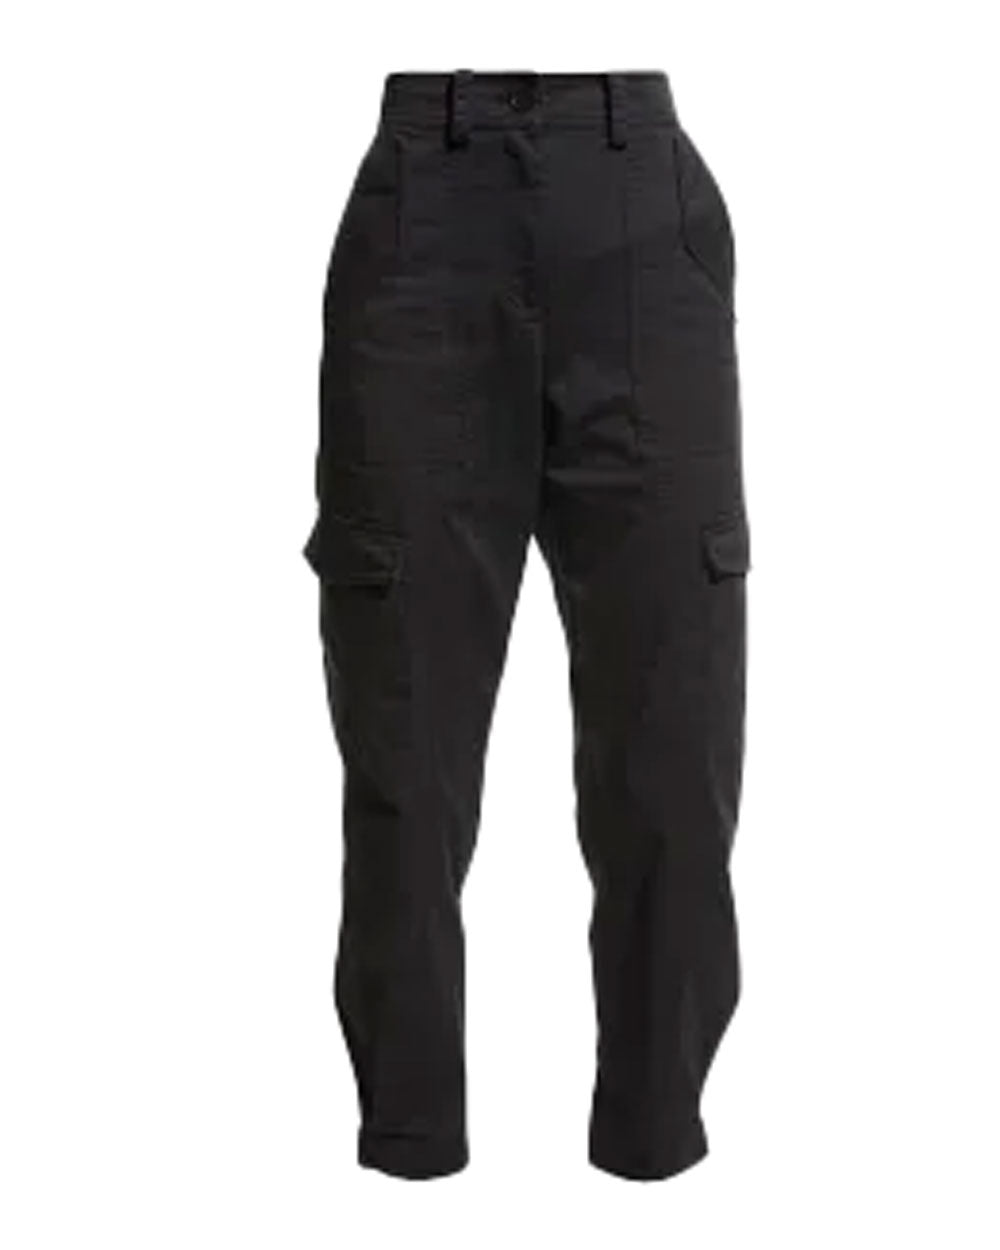 Black Coop Pant with Cargo Pockets